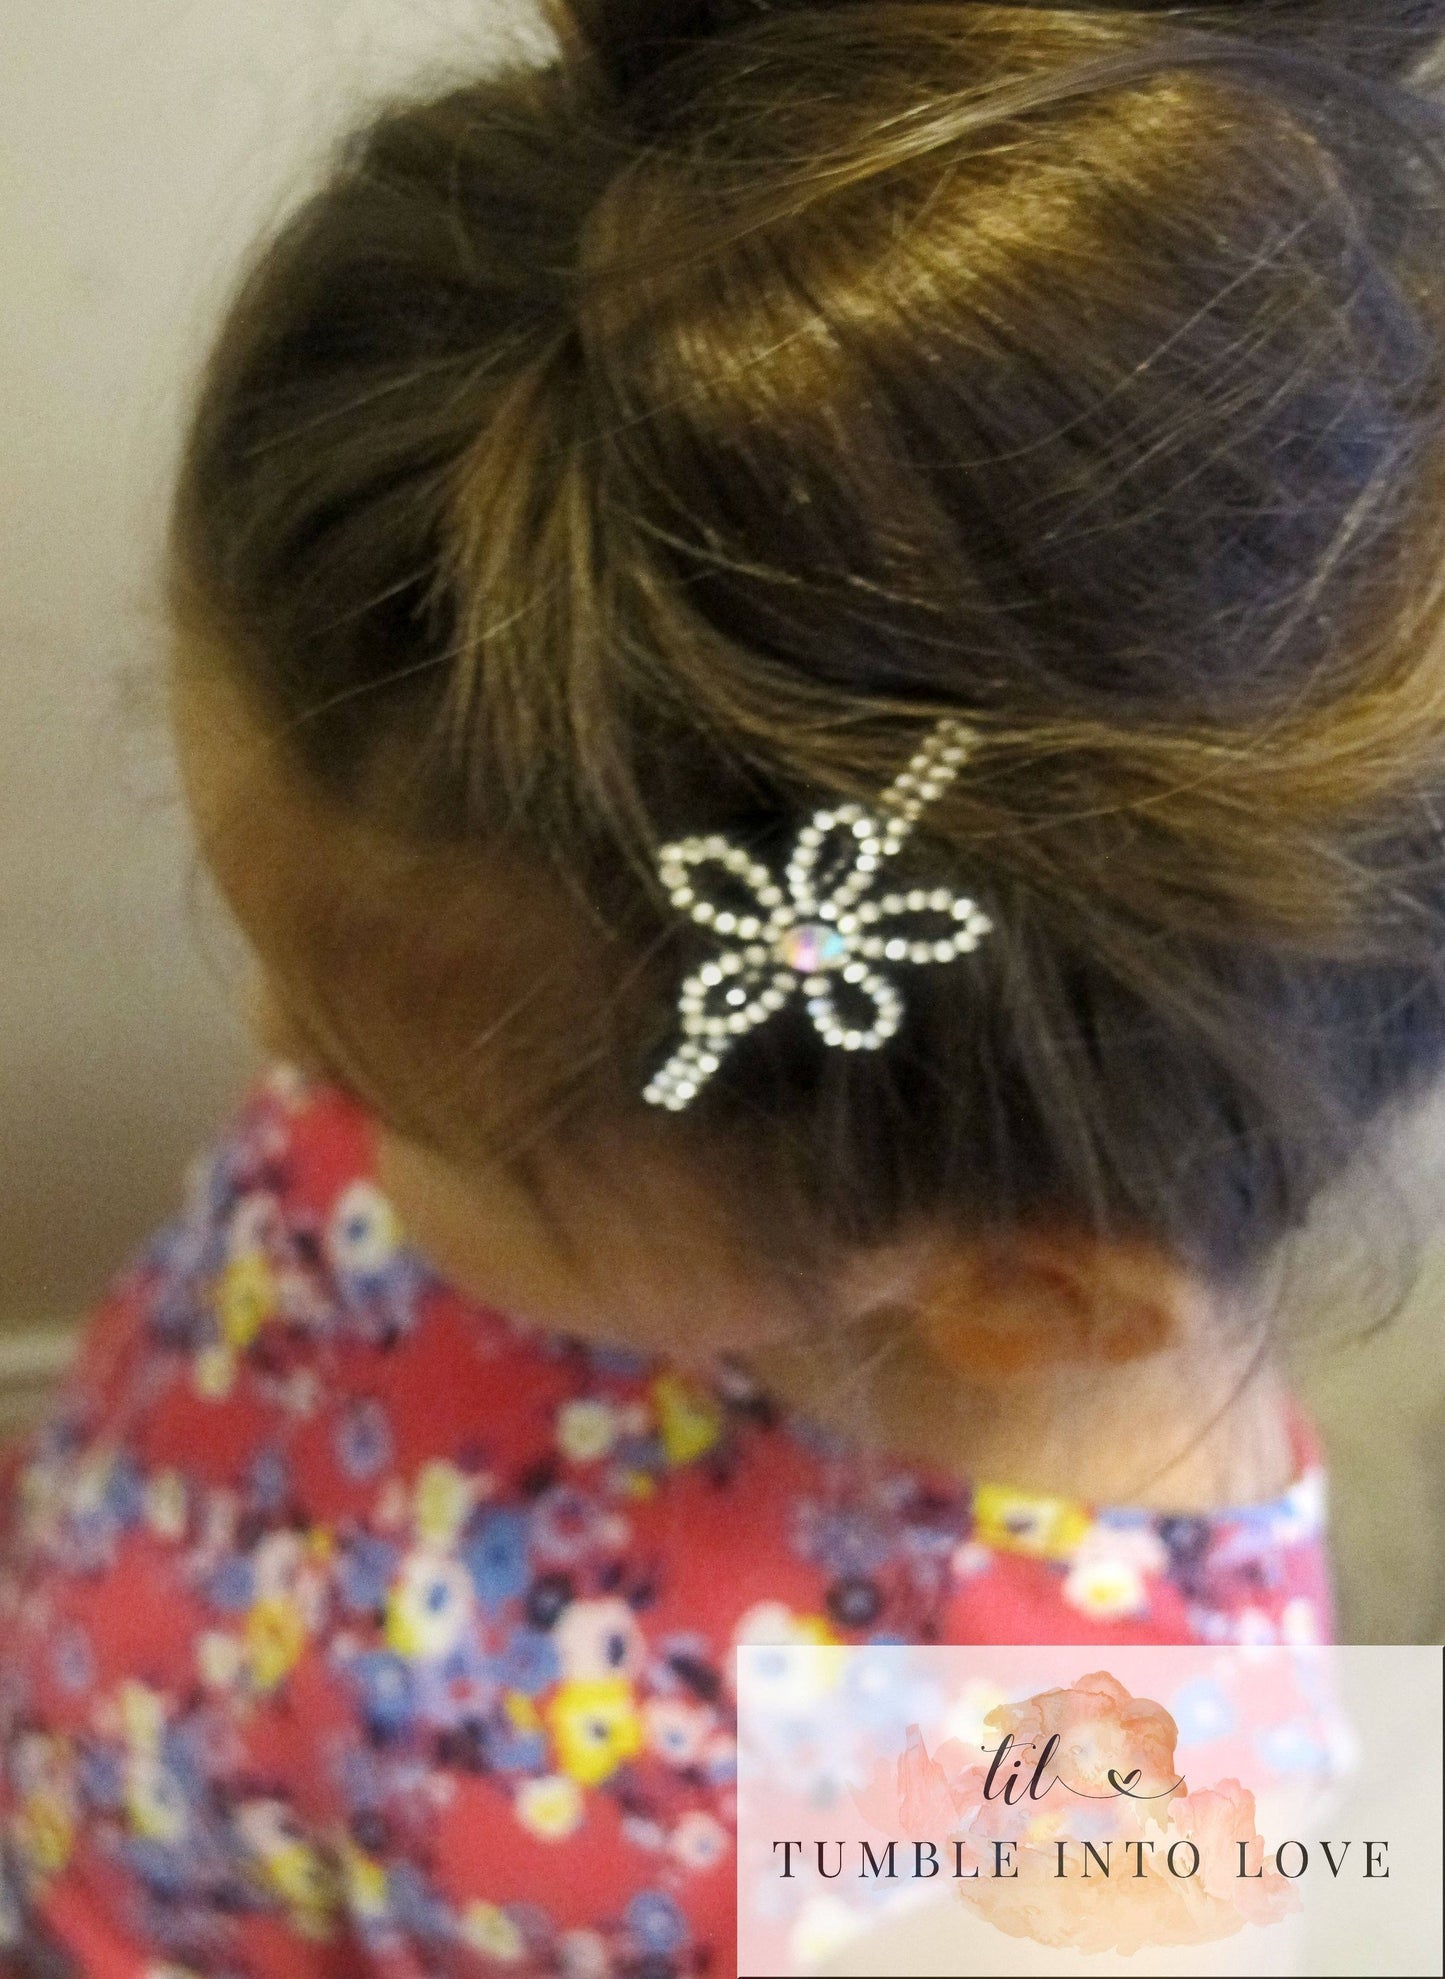 Image shows flower style clip in a child's hair.